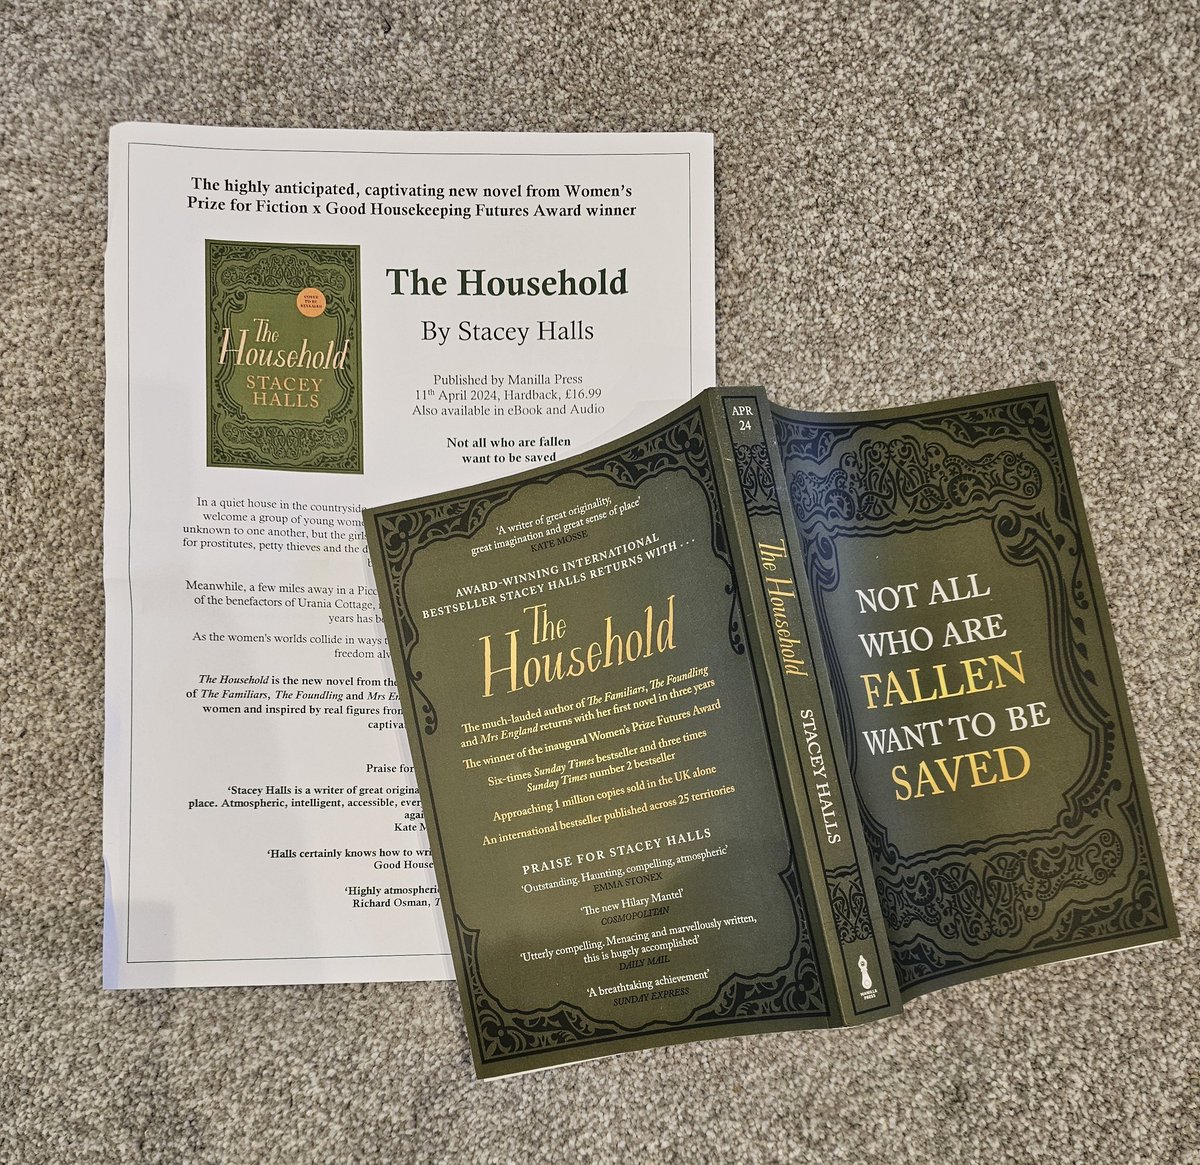 Such exciting #bookpost today!!
This is one of my most anticipated reads of the year.
#TheHousehold by @stacey_halls   is published on 11th April
Thank you so much 
@bonnierbooks_uk @ElStammeijer
@ZaffreBooks 
for the gorgeous proof copy.
#books #bookbloggers #bookX #bookTwitter